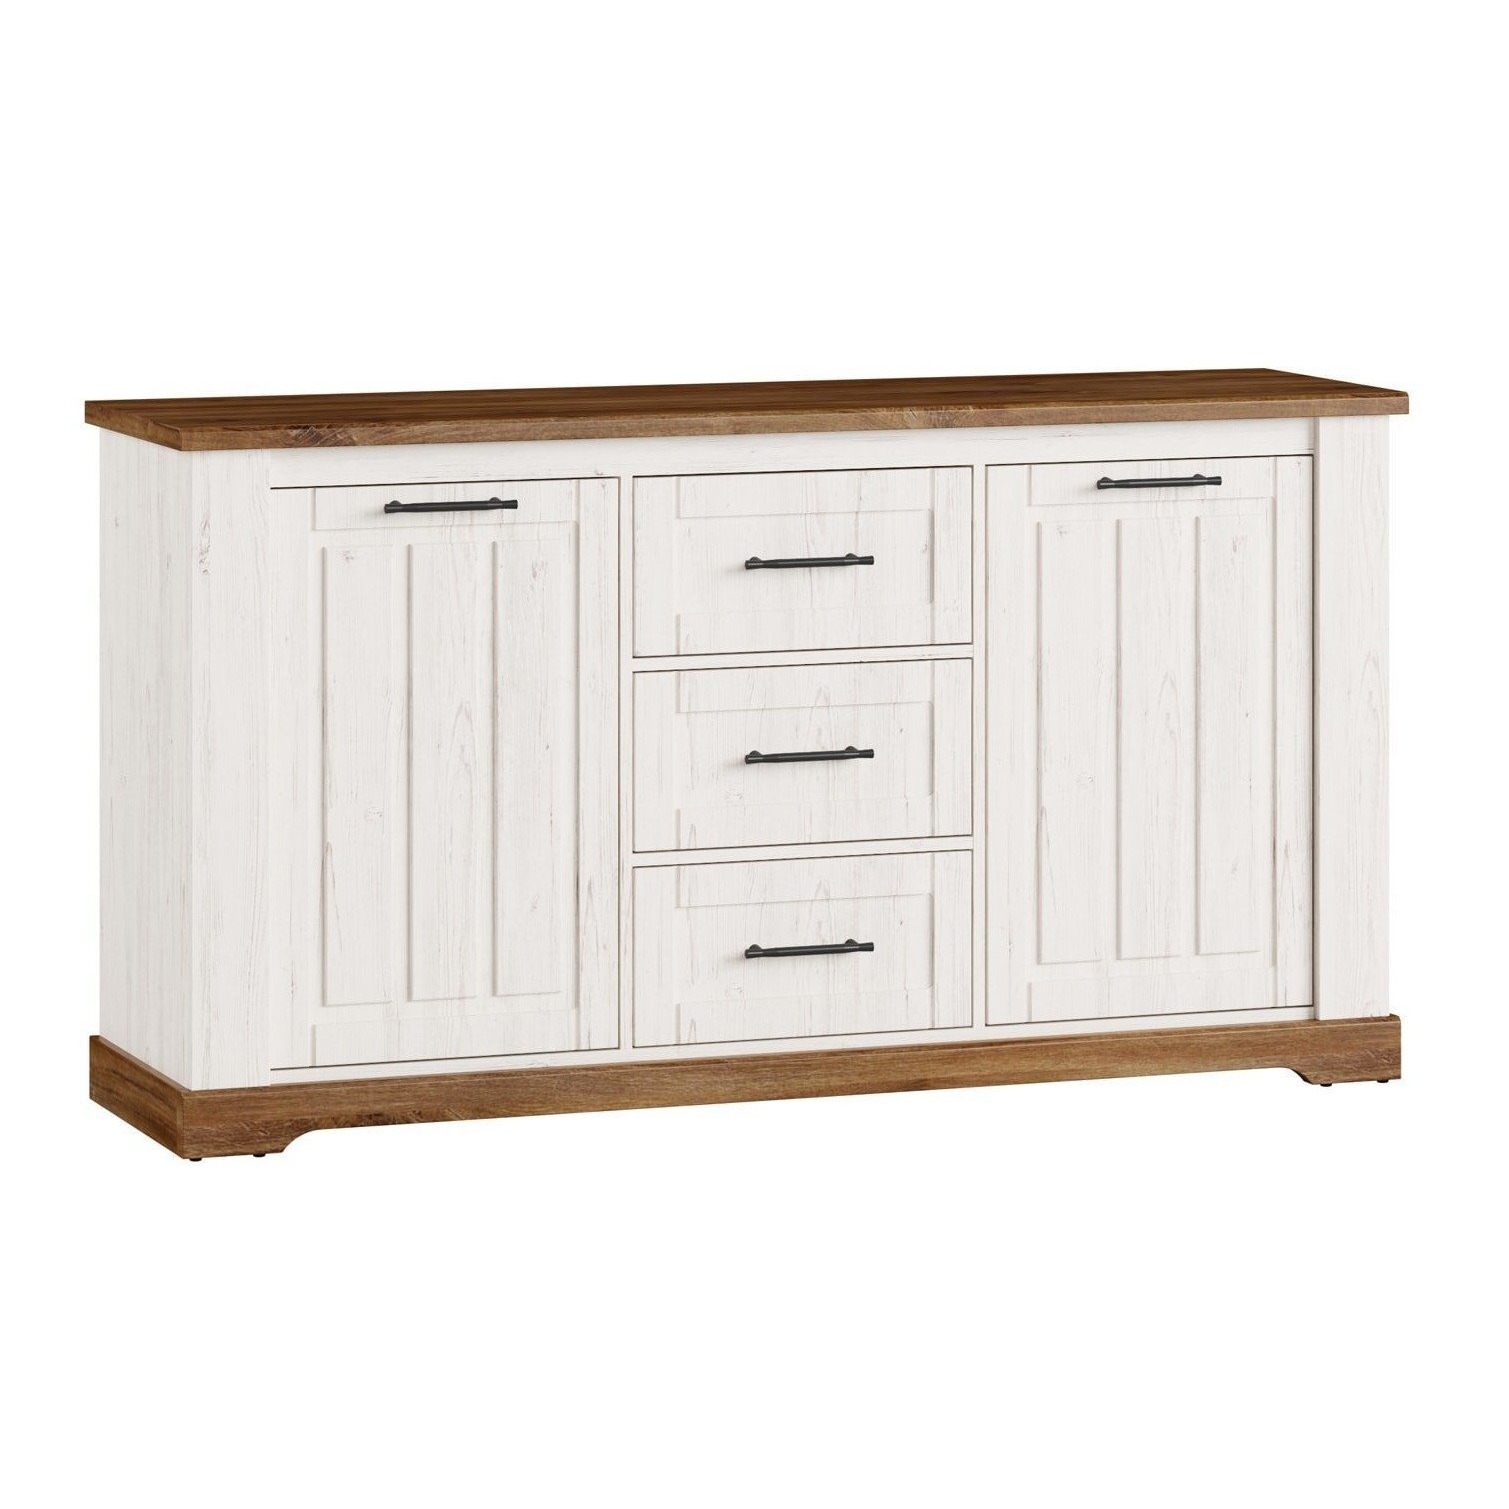 Country 45 Sideboard Cabinet 163cm - Anderson Pine 163cm - image 1